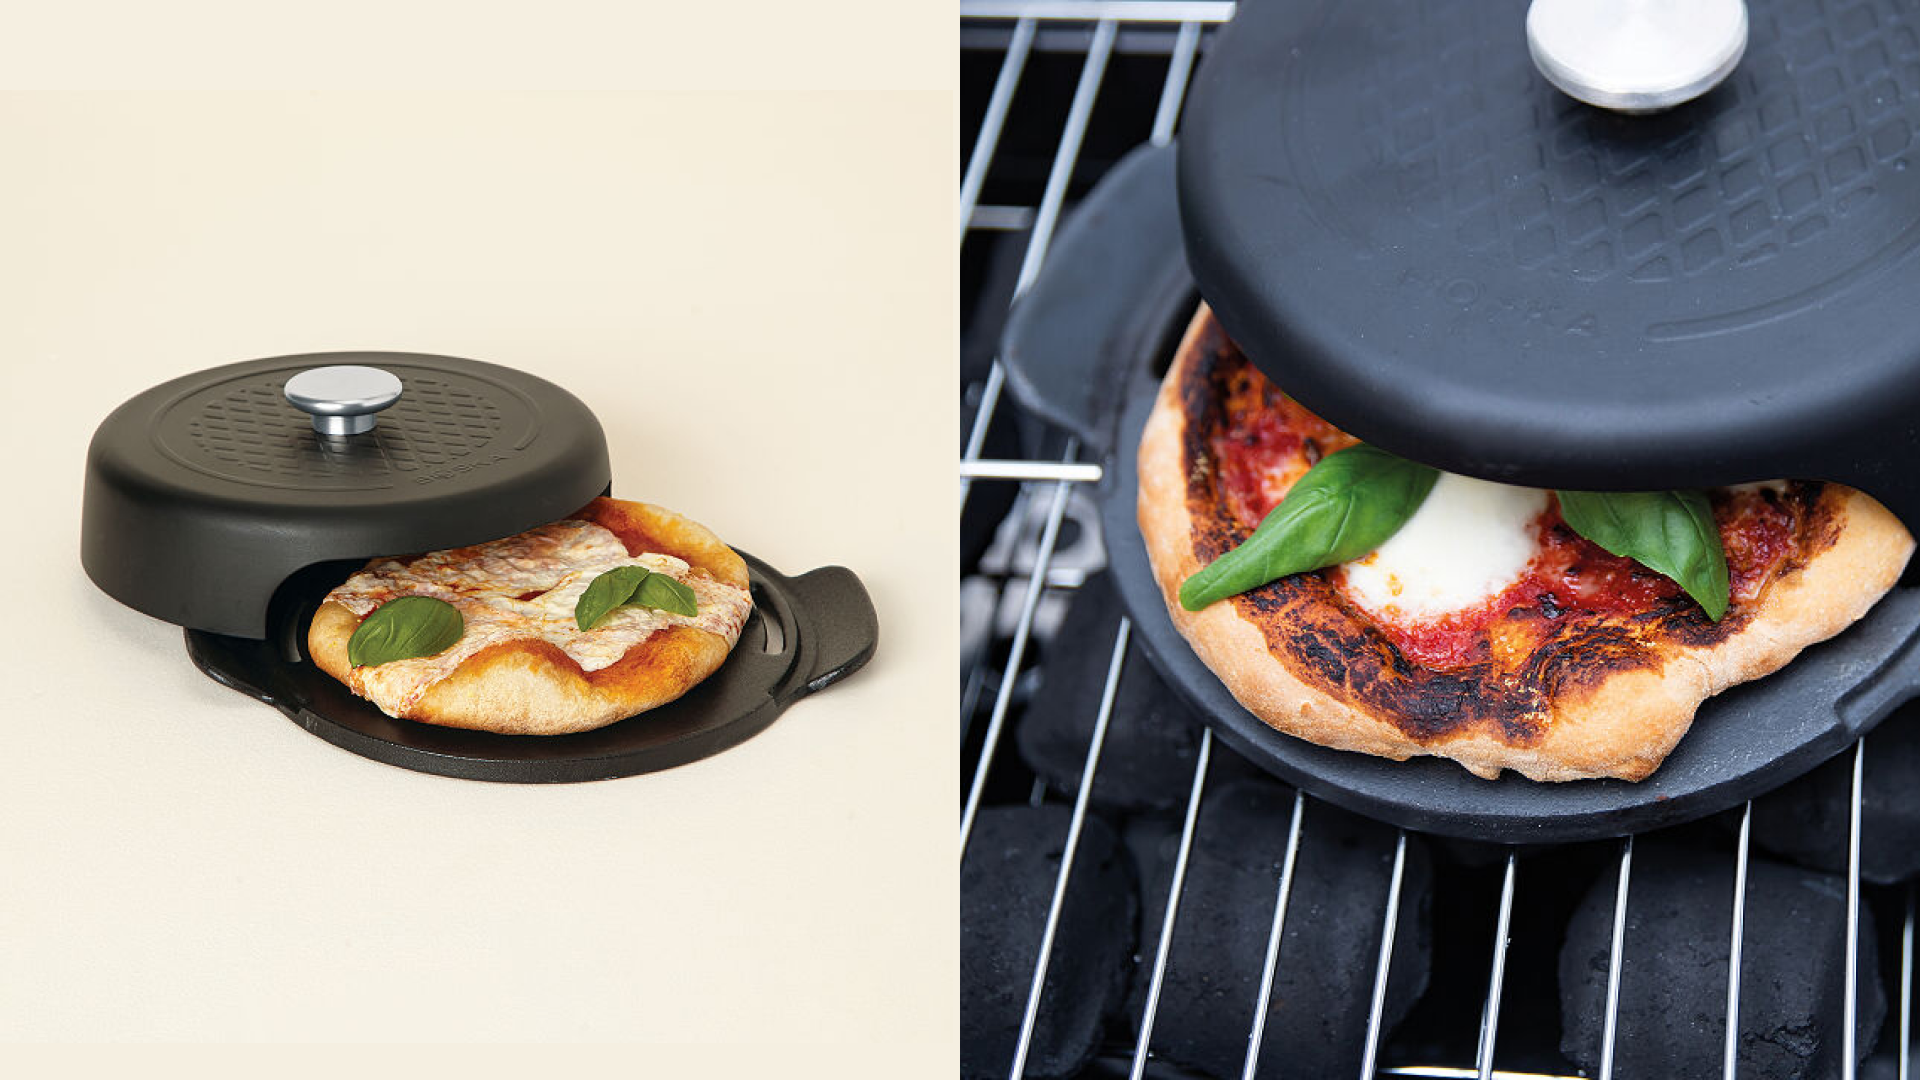 A personal pizza maker